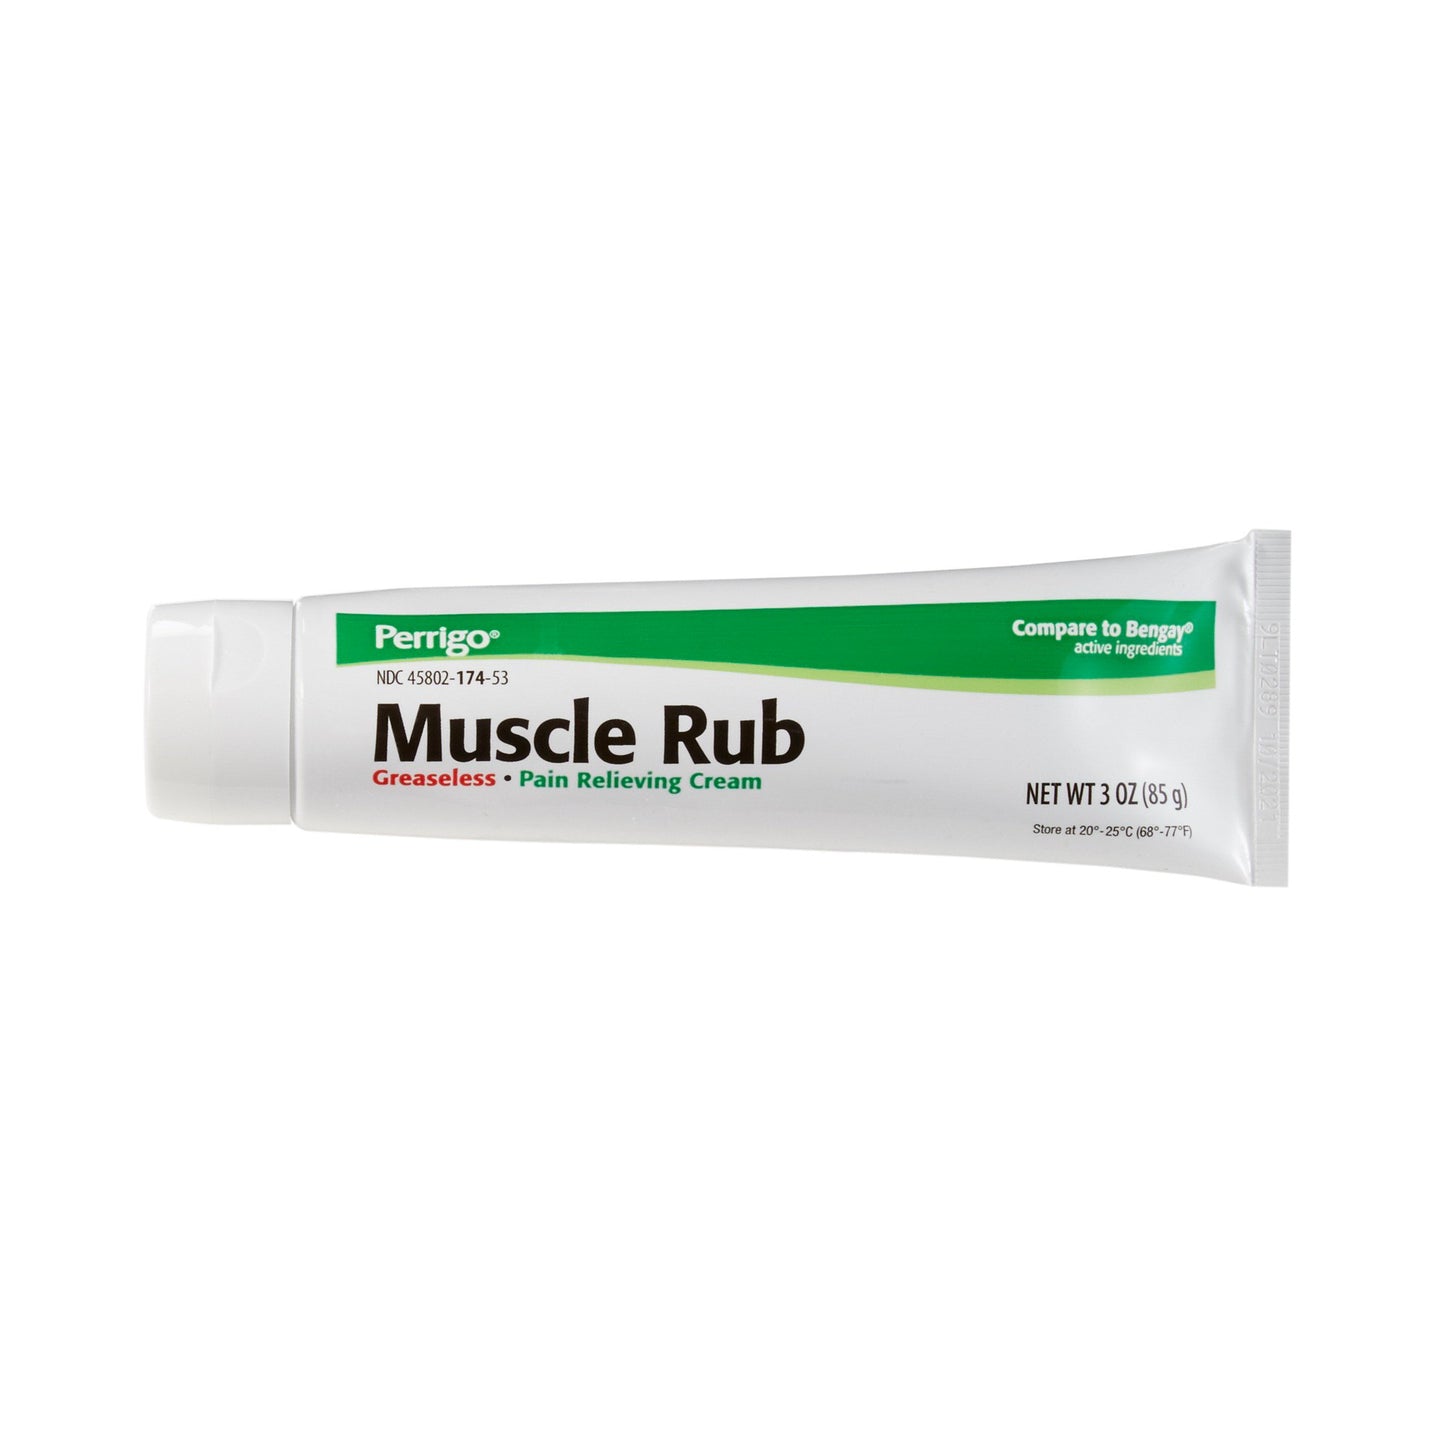 Muscle Rub Menthol / Methyl Salicylate Topical Pain Relief